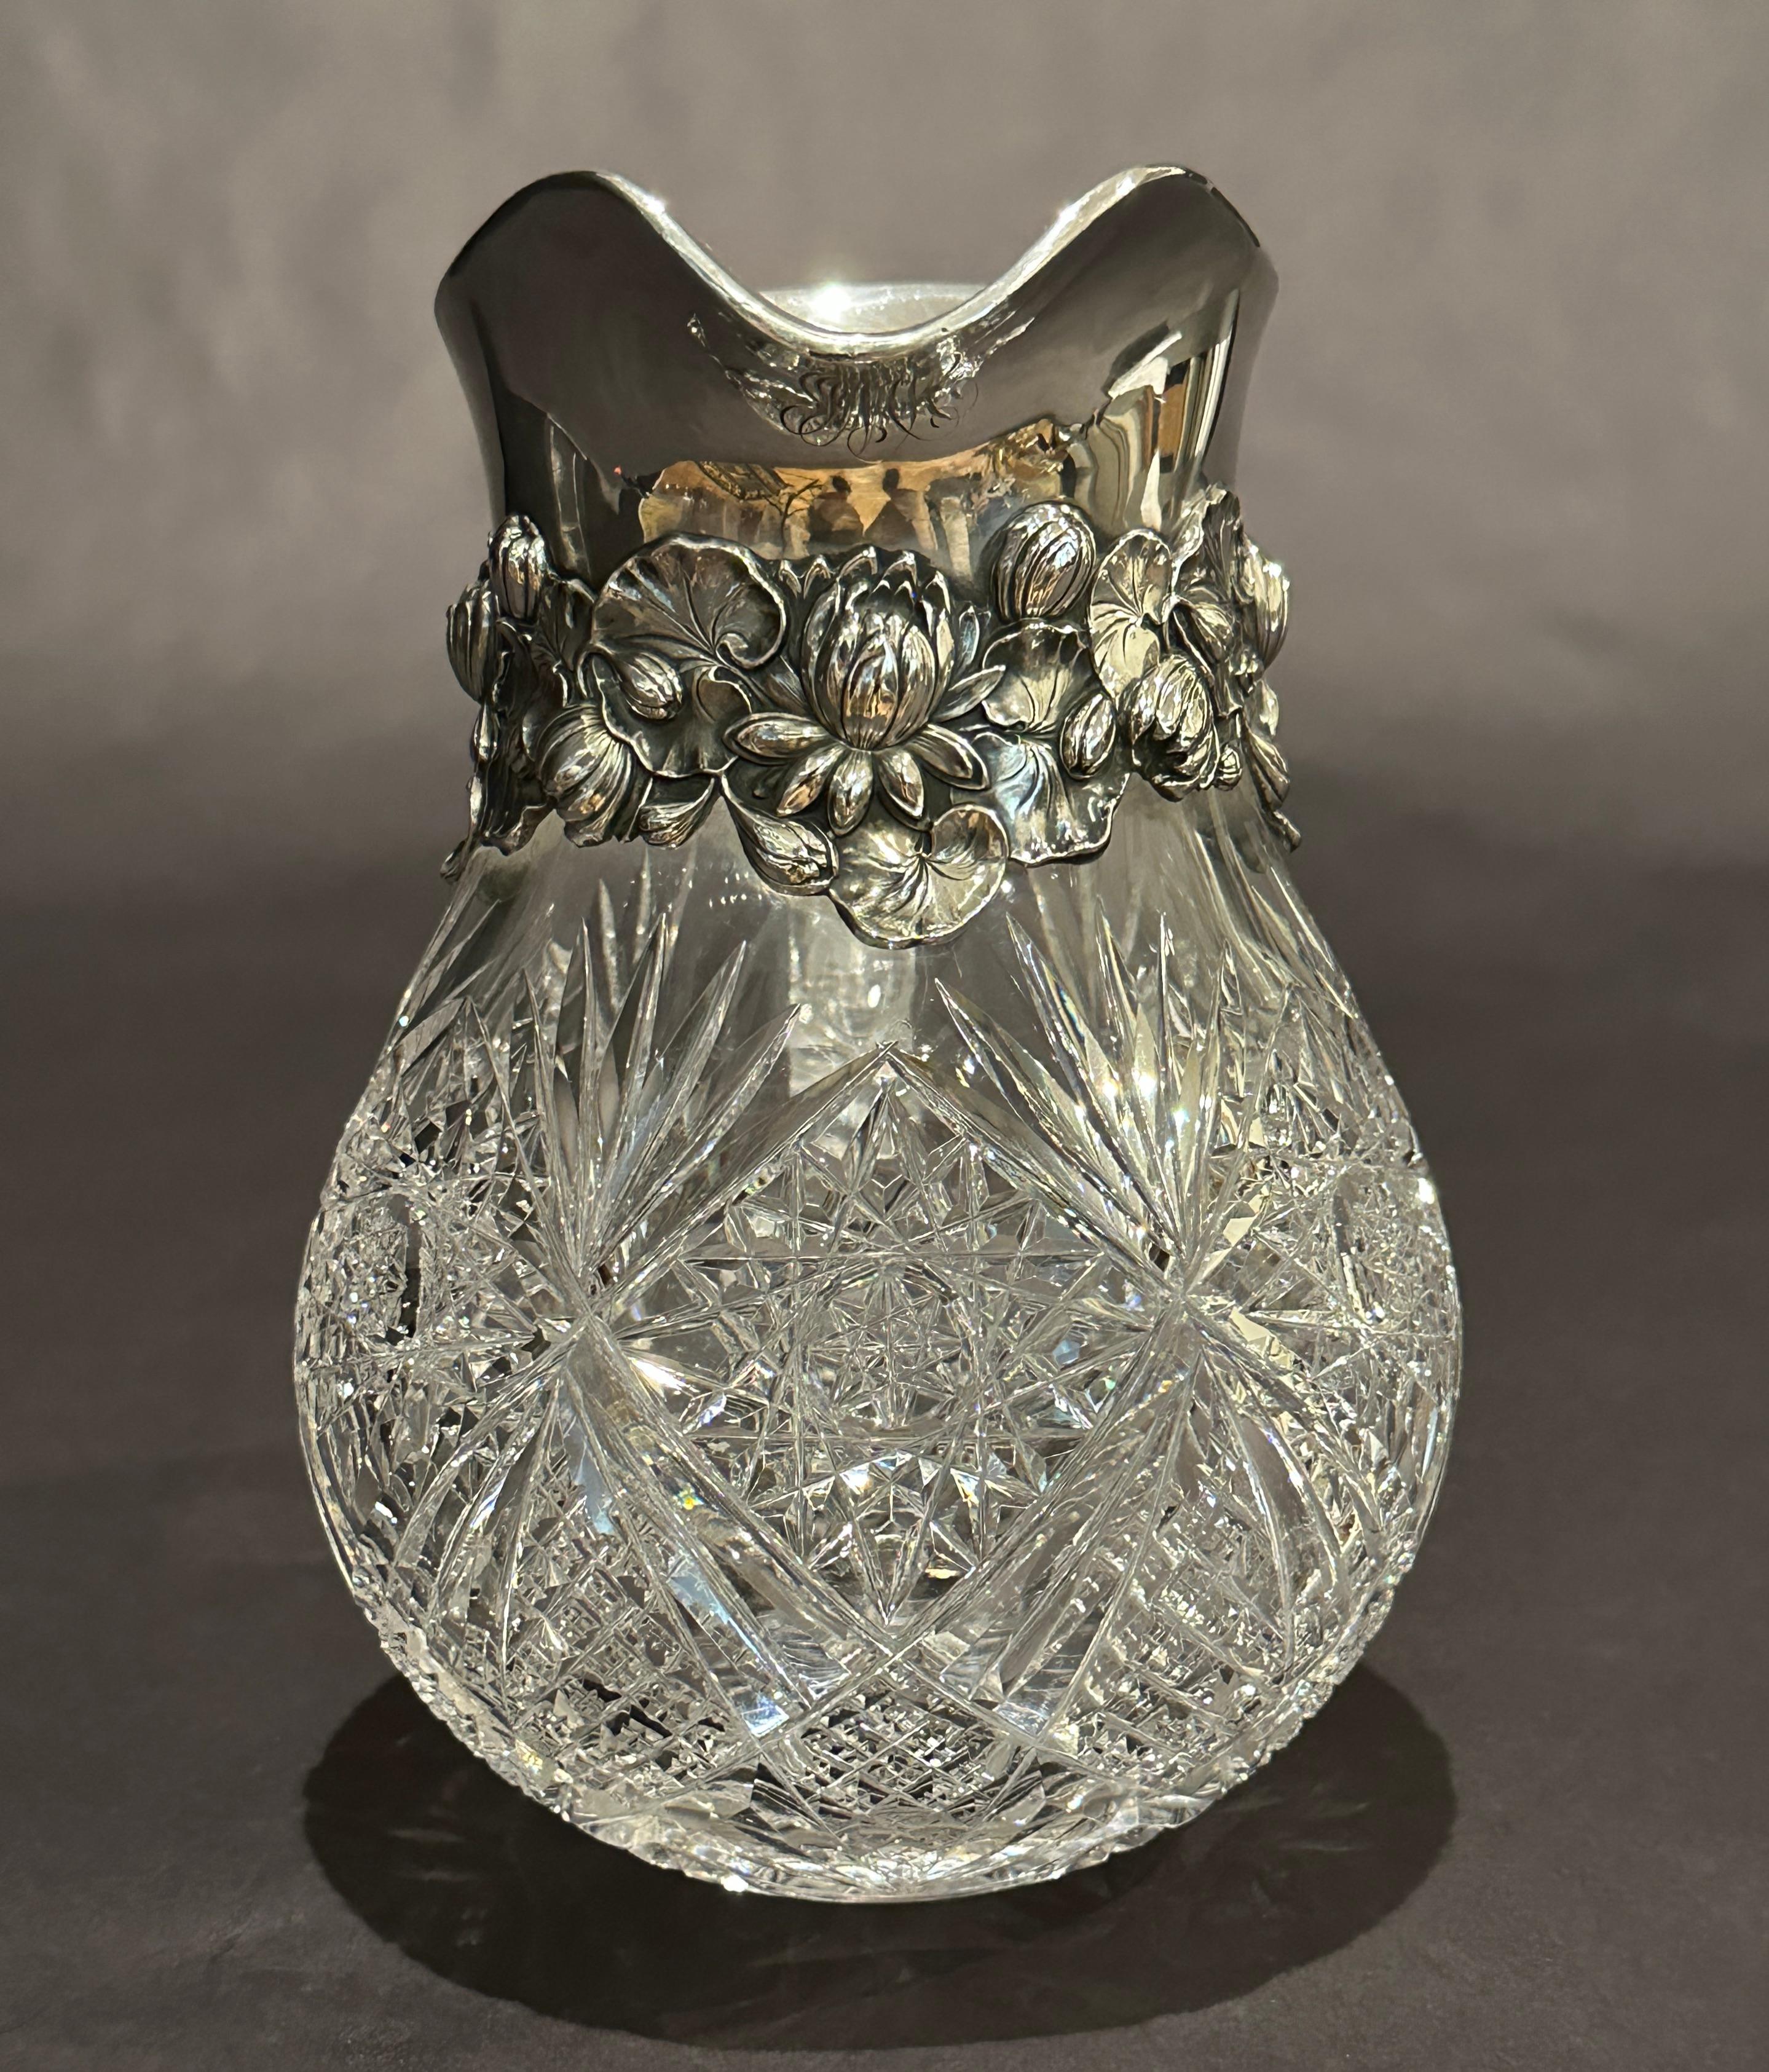 Gorham Sterling Mounted ABP Cut Glass Pitcher In Good Condition For Sale In Norwood, NJ